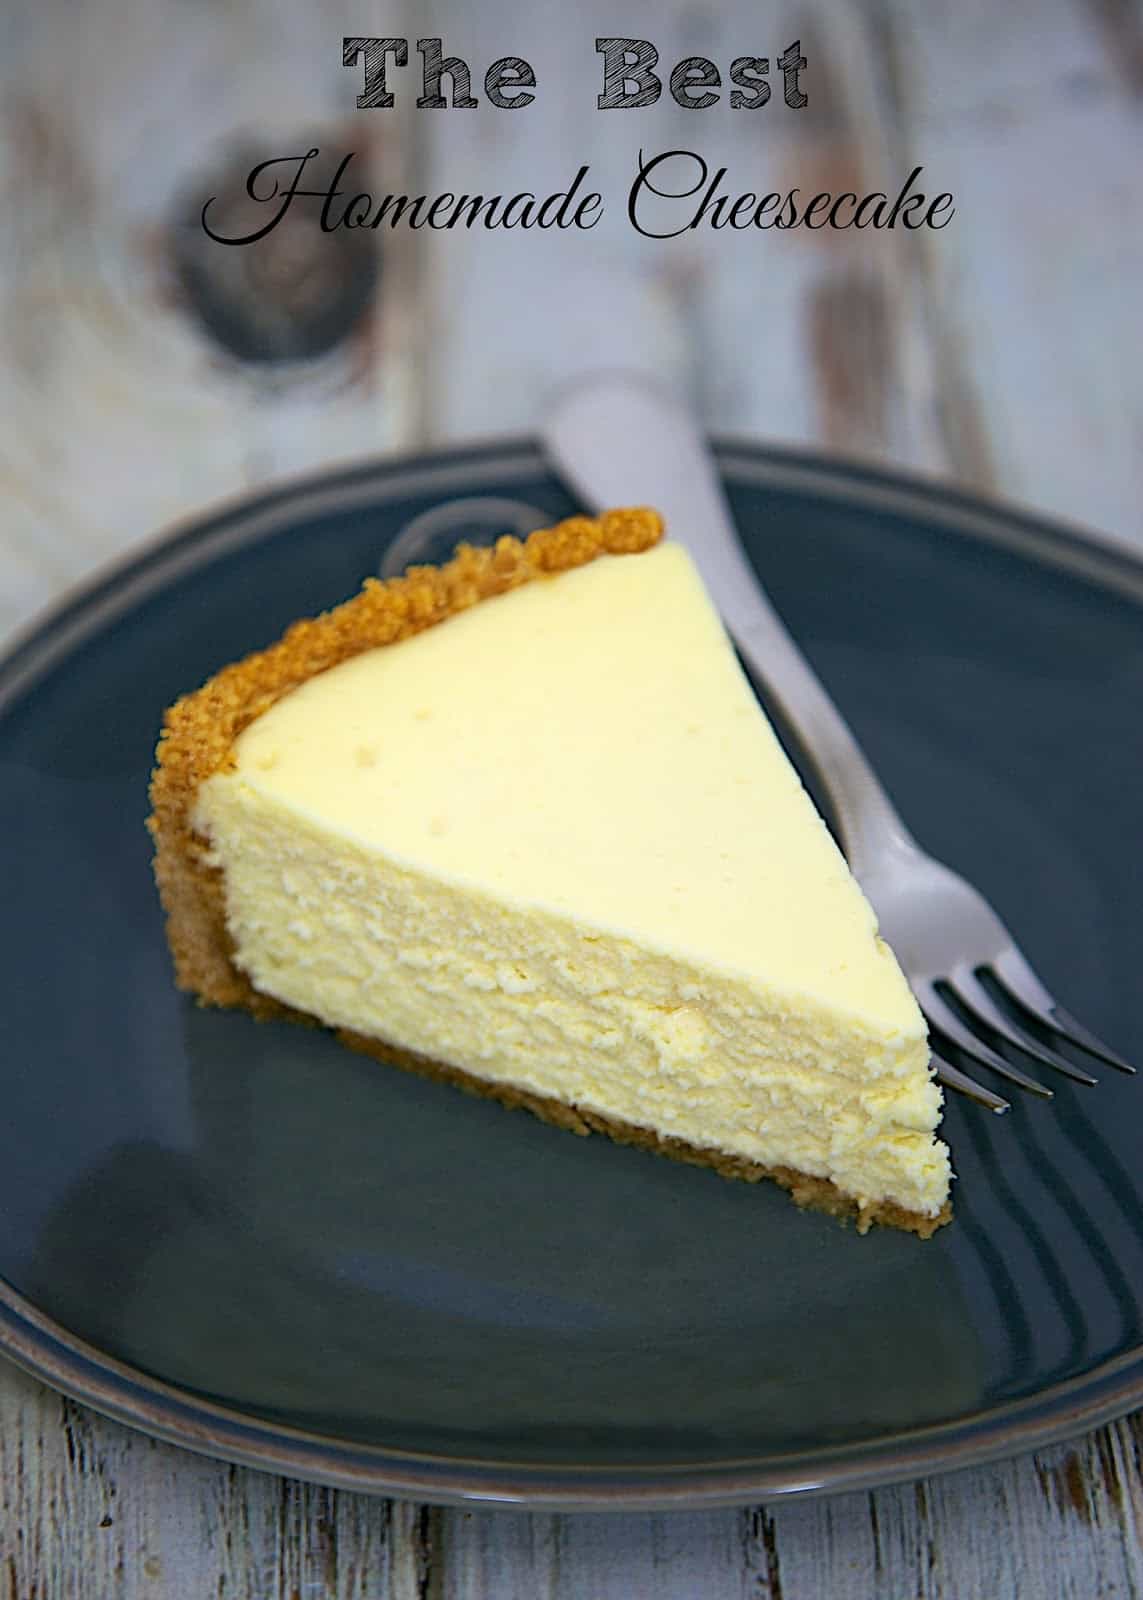 The Best Homemade Cheesecake - get the secret for the lightest and fluffiest cheesecake ever!